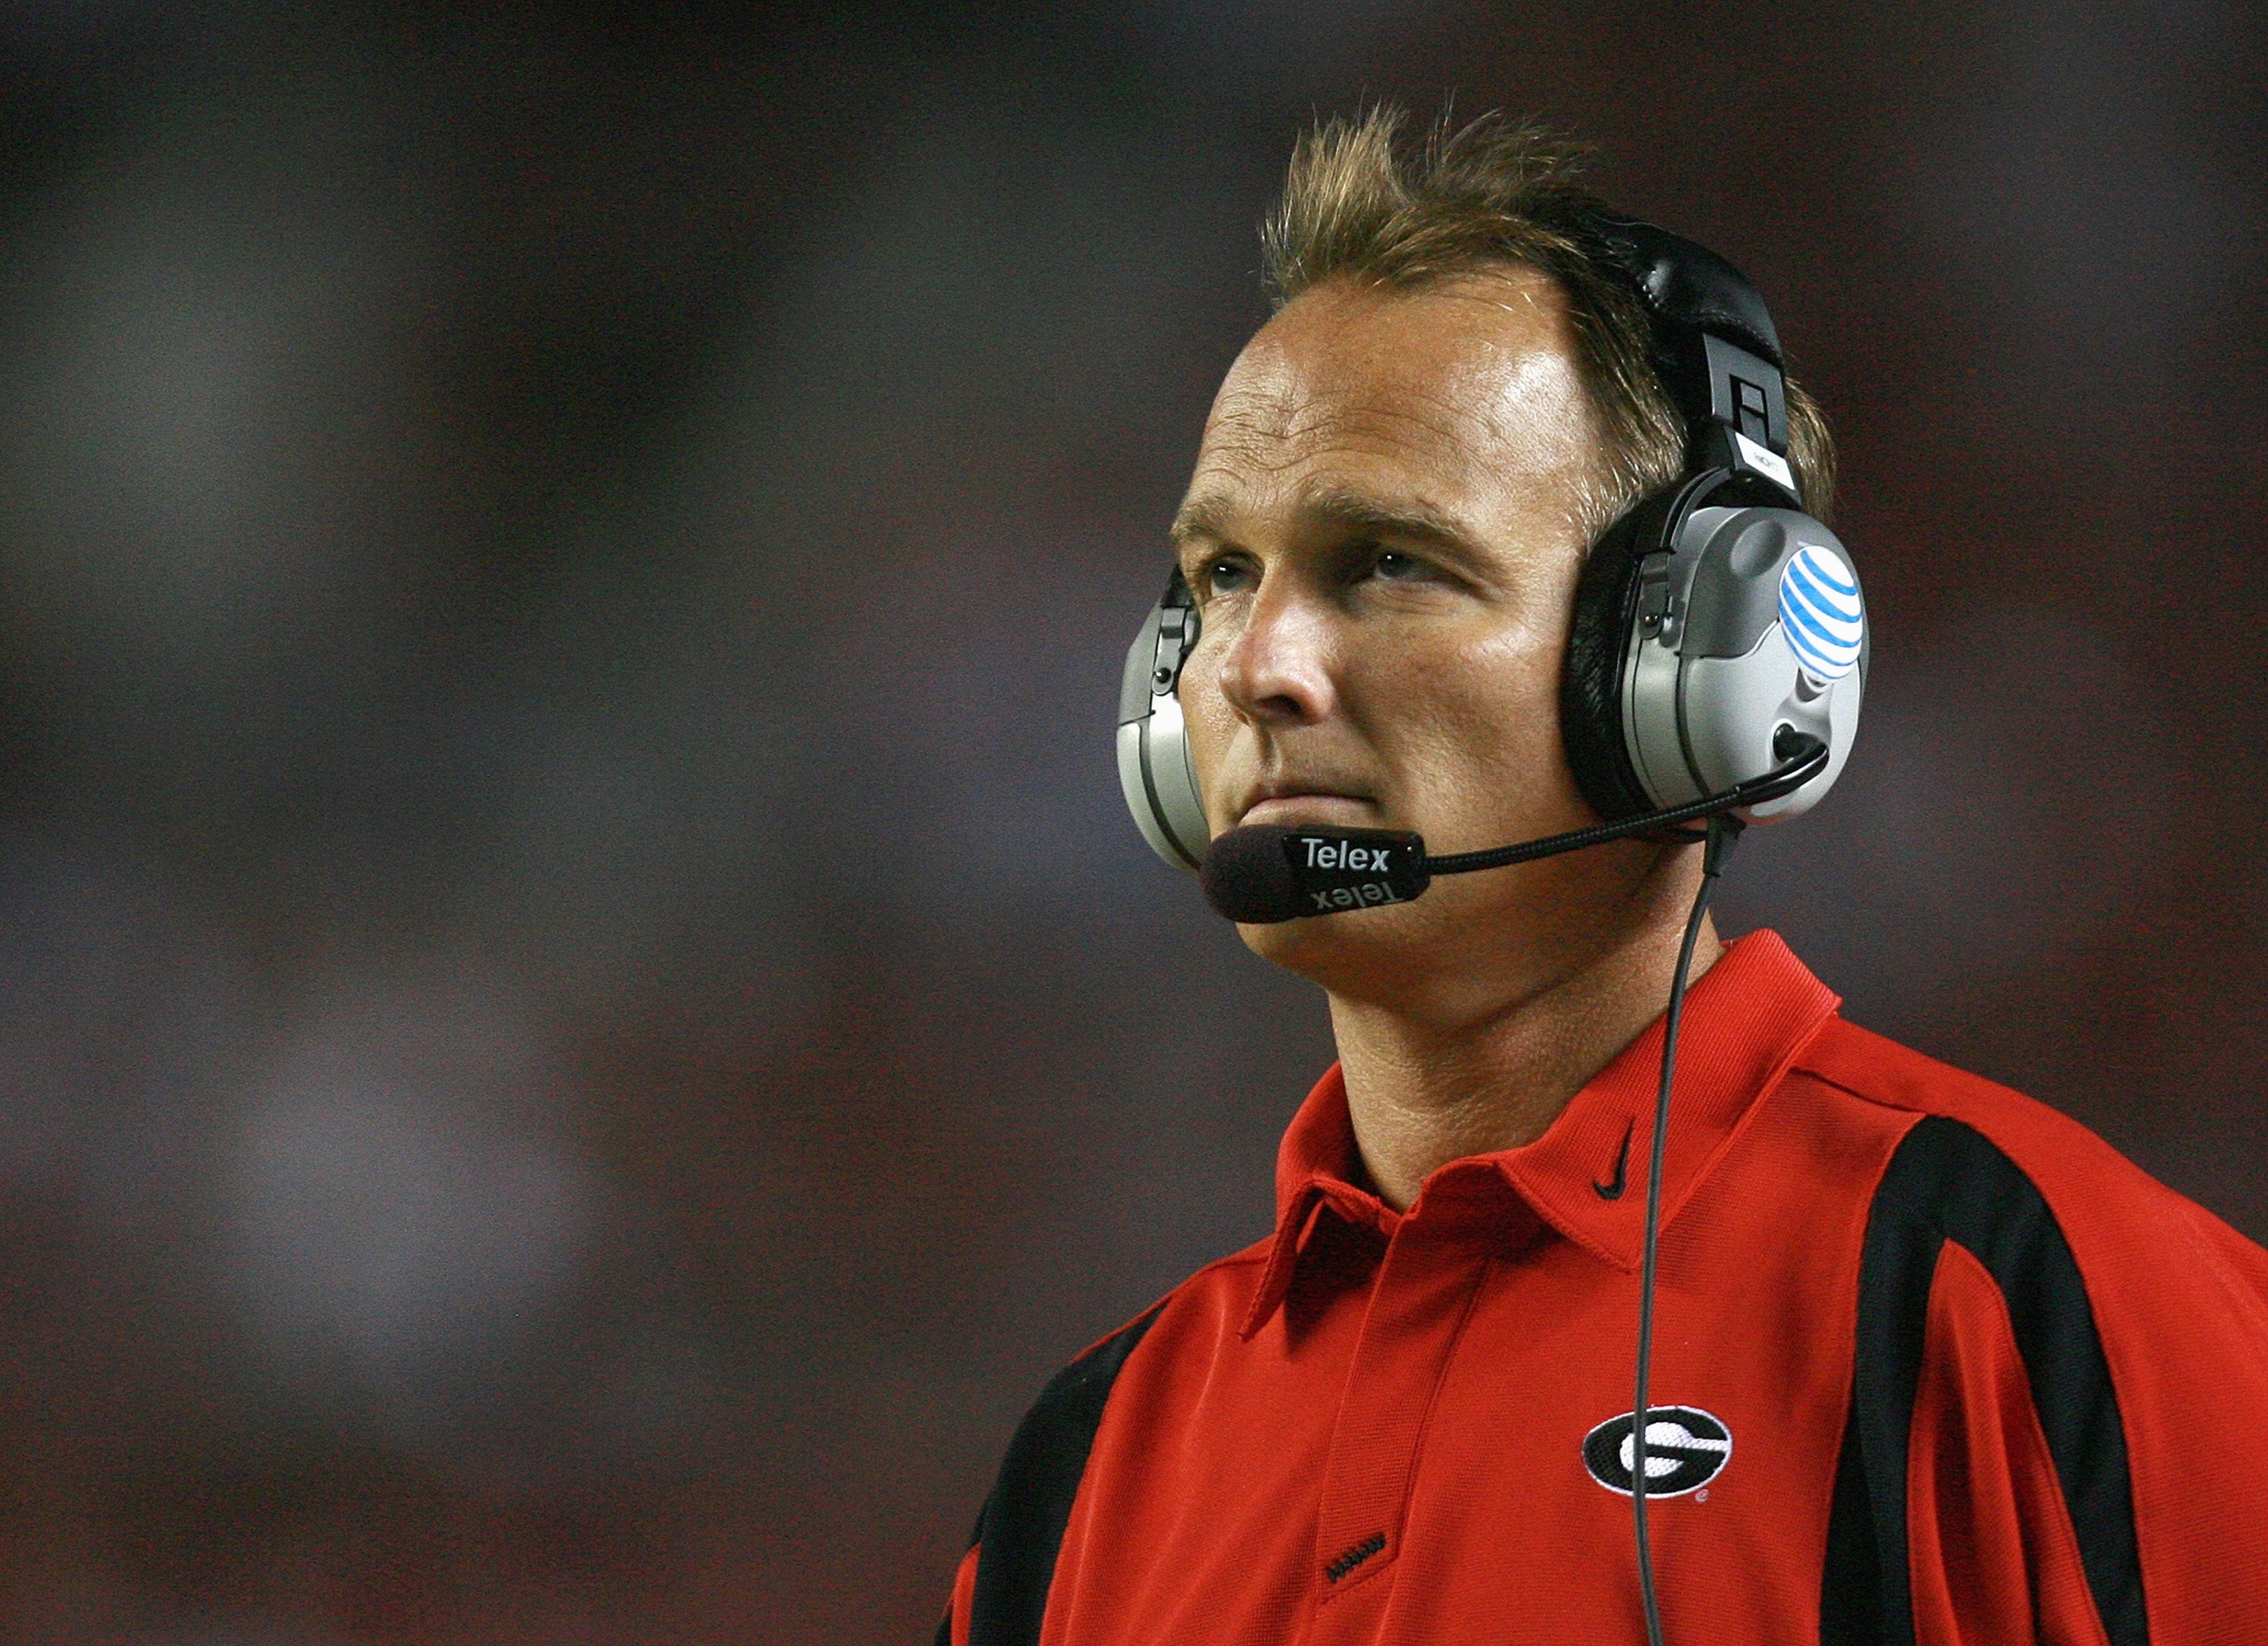 TUSCALOOSA, AL - SEPTEMBER 22: Head coach Mark Richt of the Georgia Bulldogs looks on during the game against the Alabama Crimson Tide at Bryant-Denny Stadium September 22, 2007 in Tuscaloosa, Alabama. Georgia defeated Alabama 26-23 in overtime. (Photo by